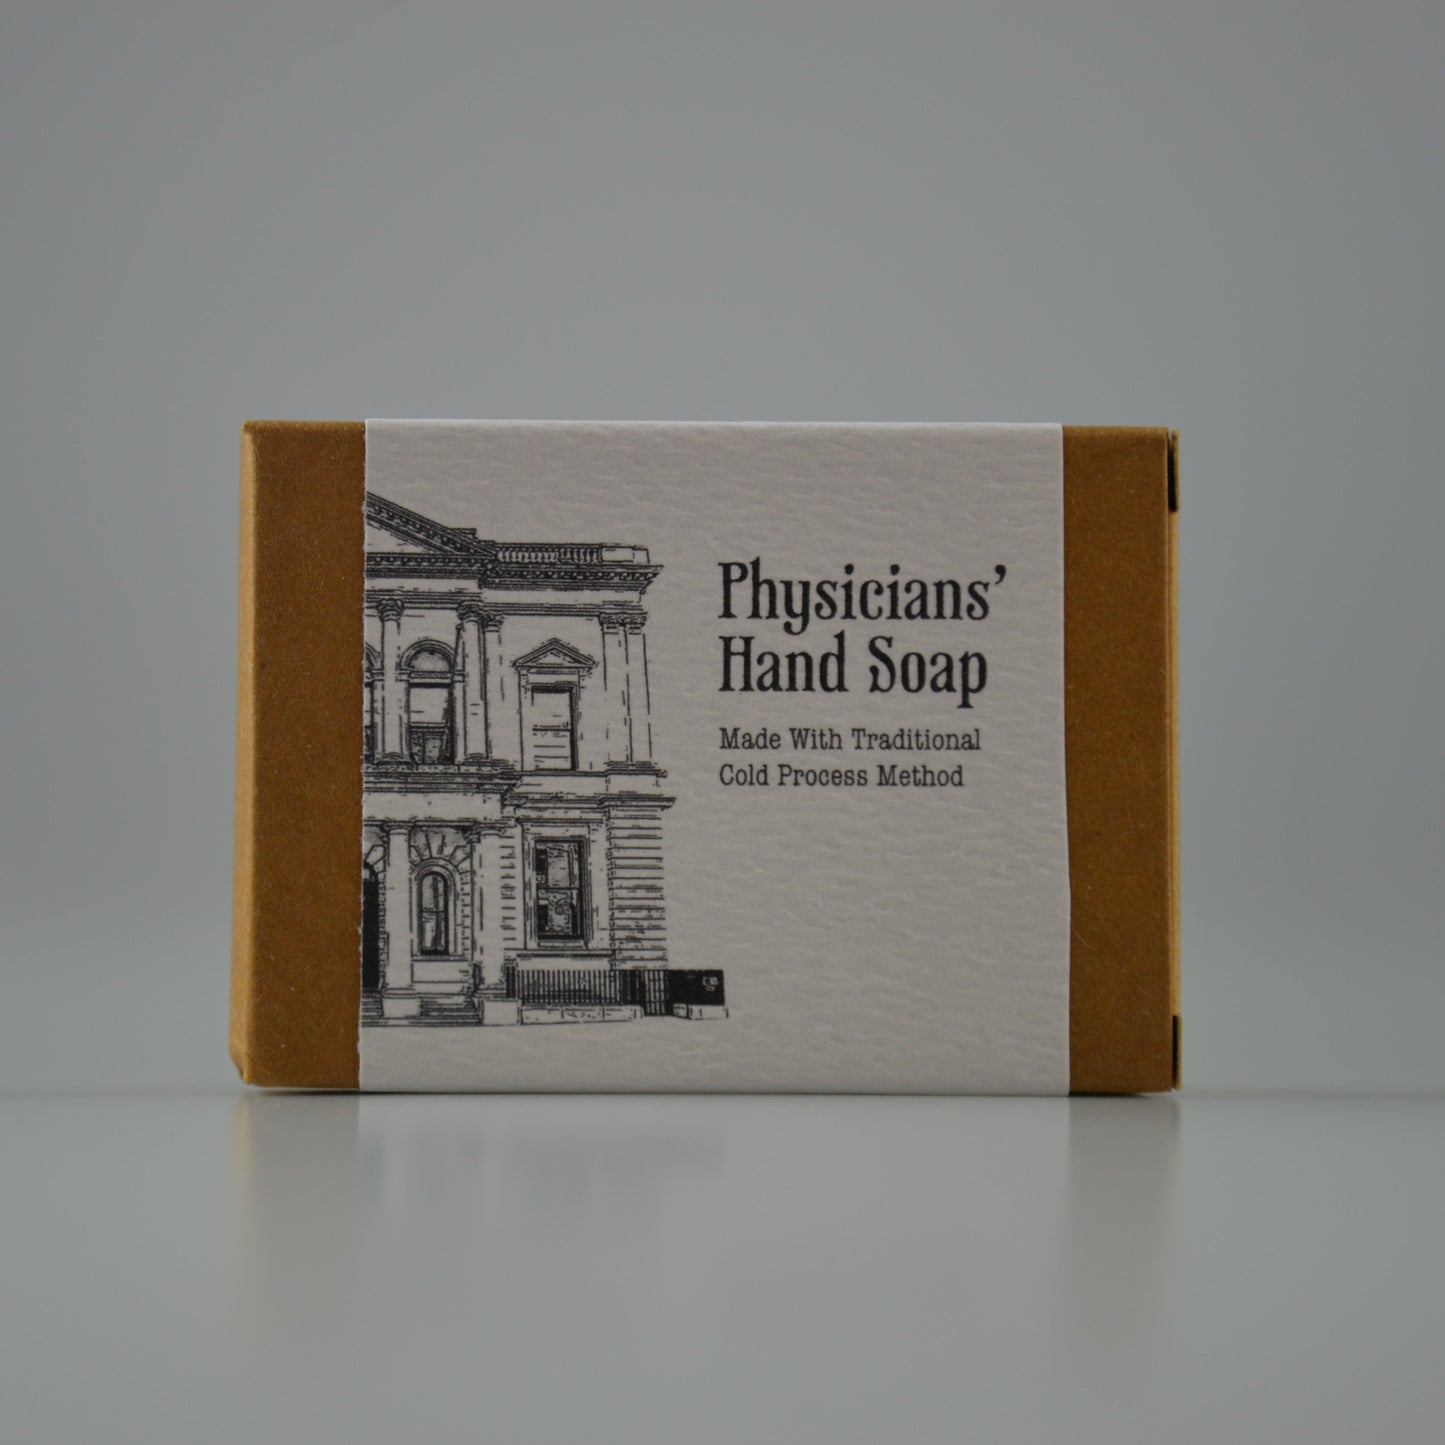 Physicians' Hand Soap